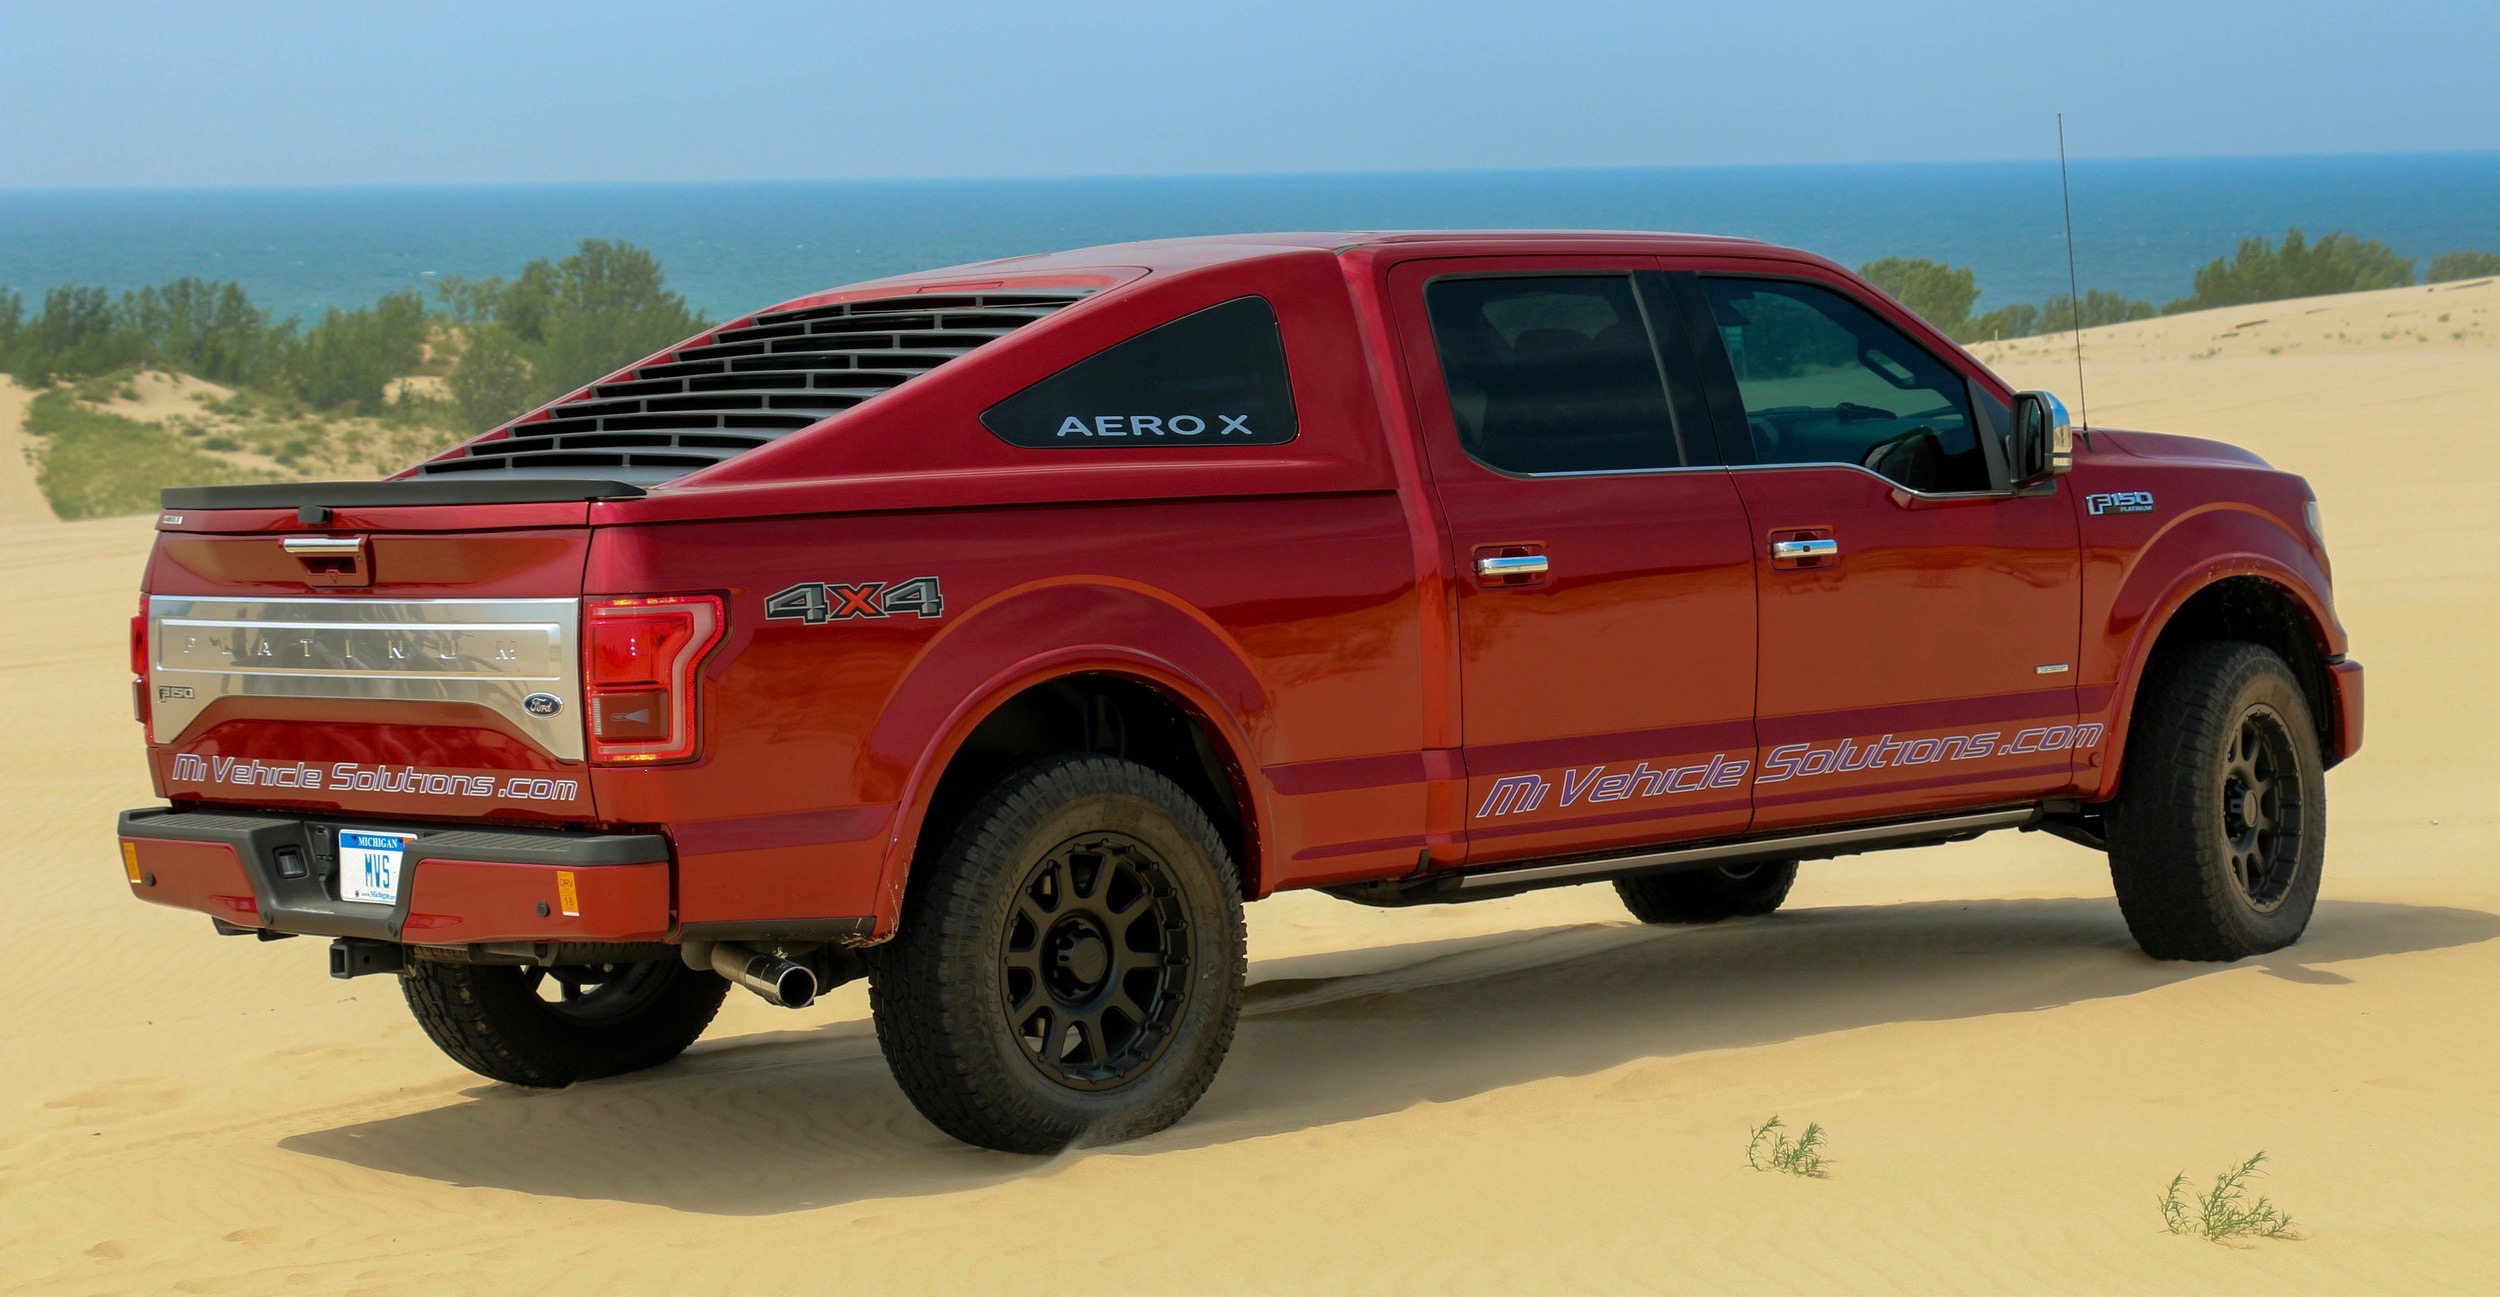 Aero X, Vintage Mustang styling for modern F-150 pickups, ClassicCars.com Journal